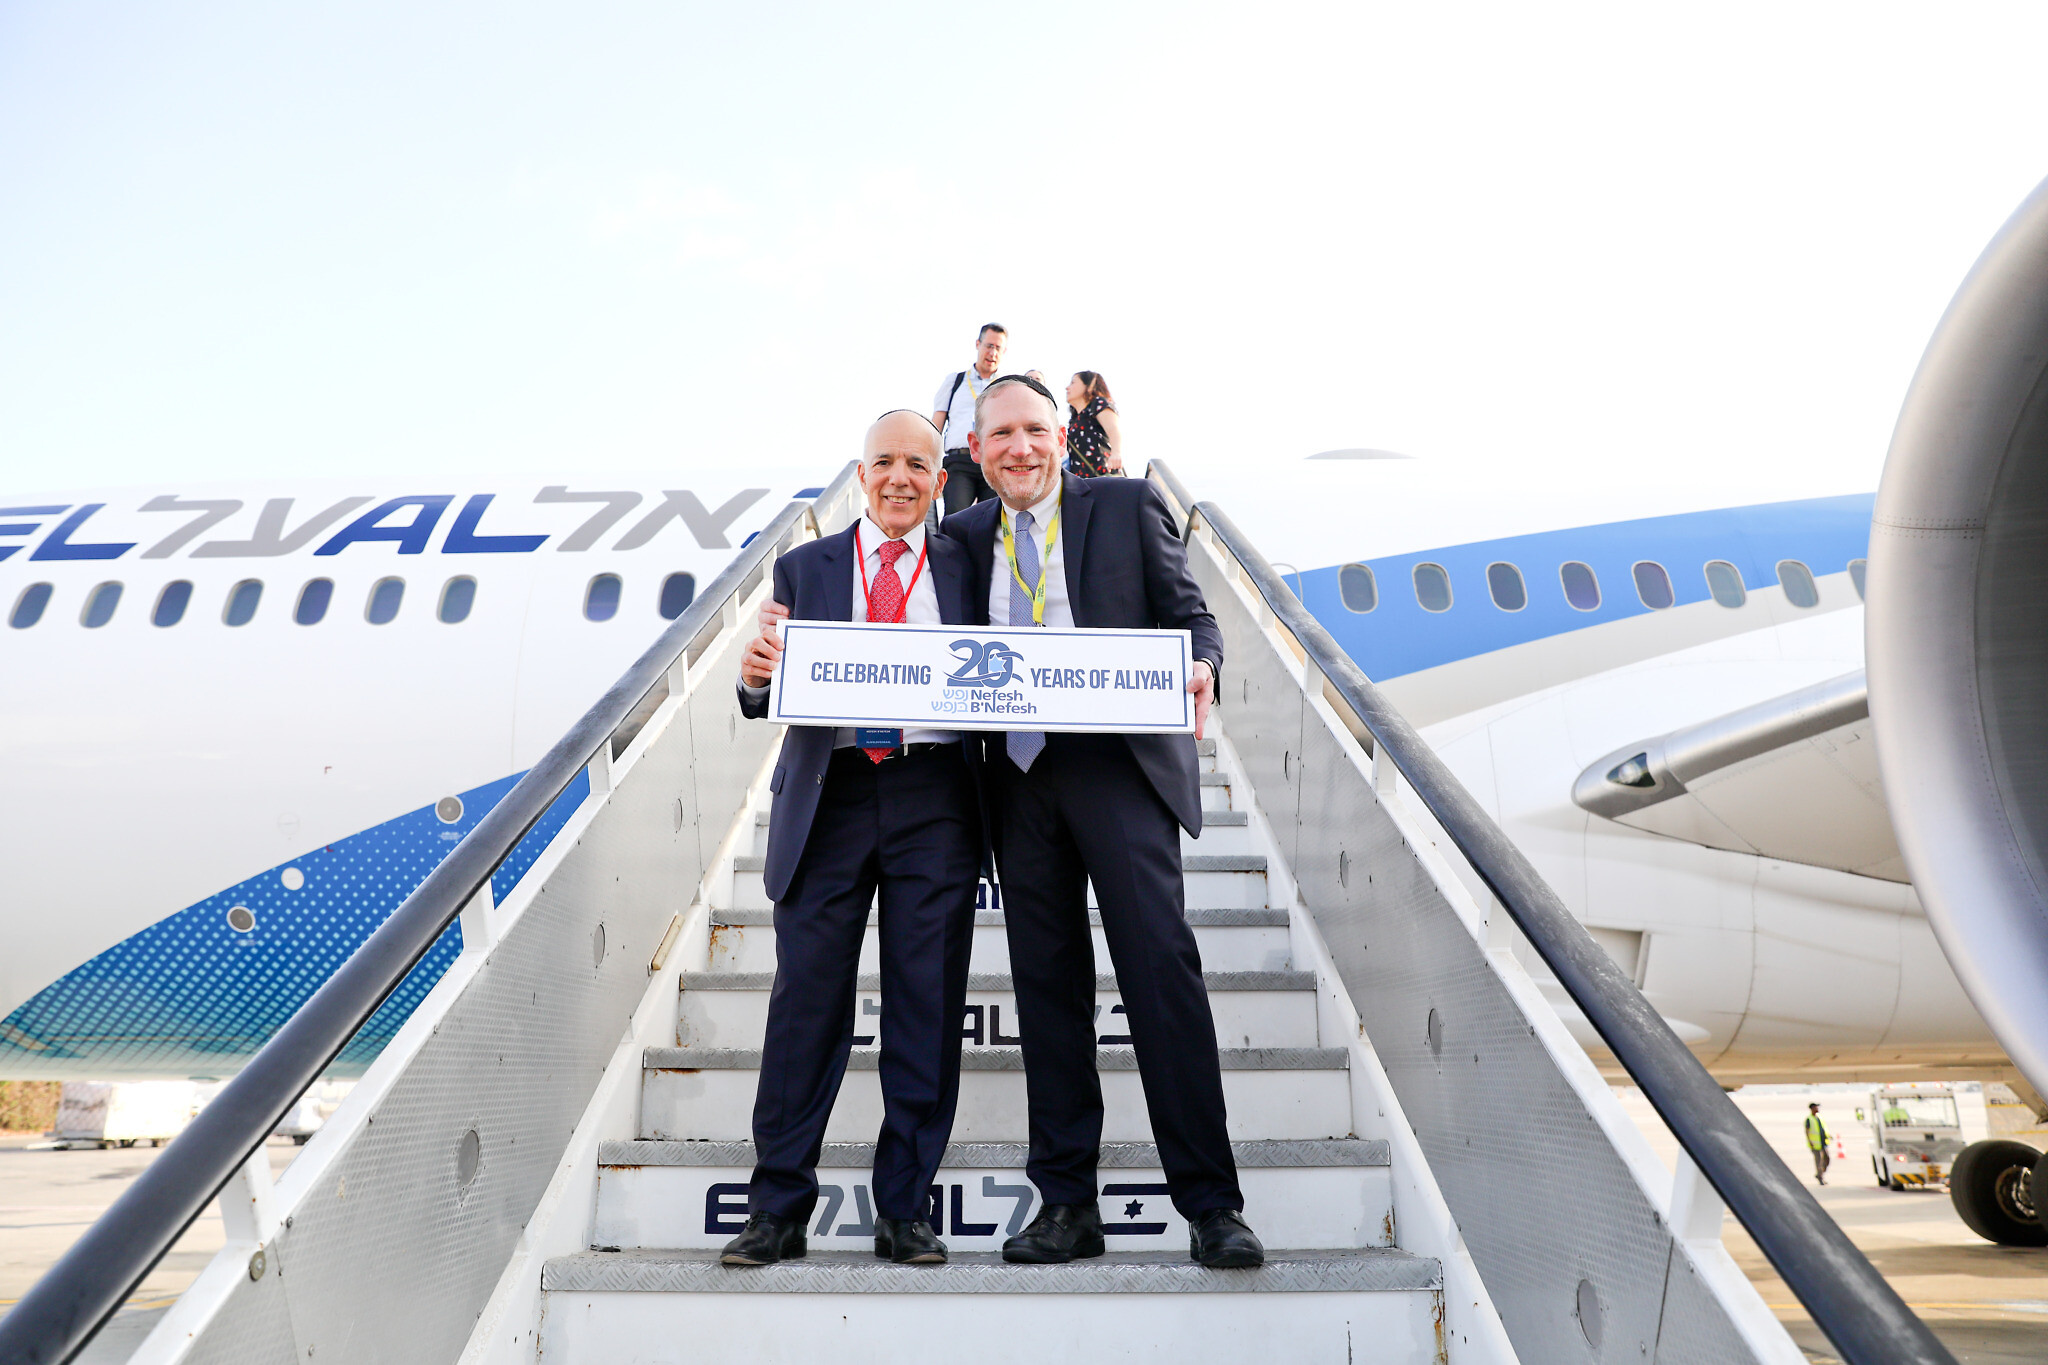 (2022Charter) – Co-Founders of NBN, Tony Gelbart and Rabbi Yehoshua Fass, de-plane 63rd charter Aliyah flight and celebrate 20 years of the organization (Photo credit: Yonit Schiller)